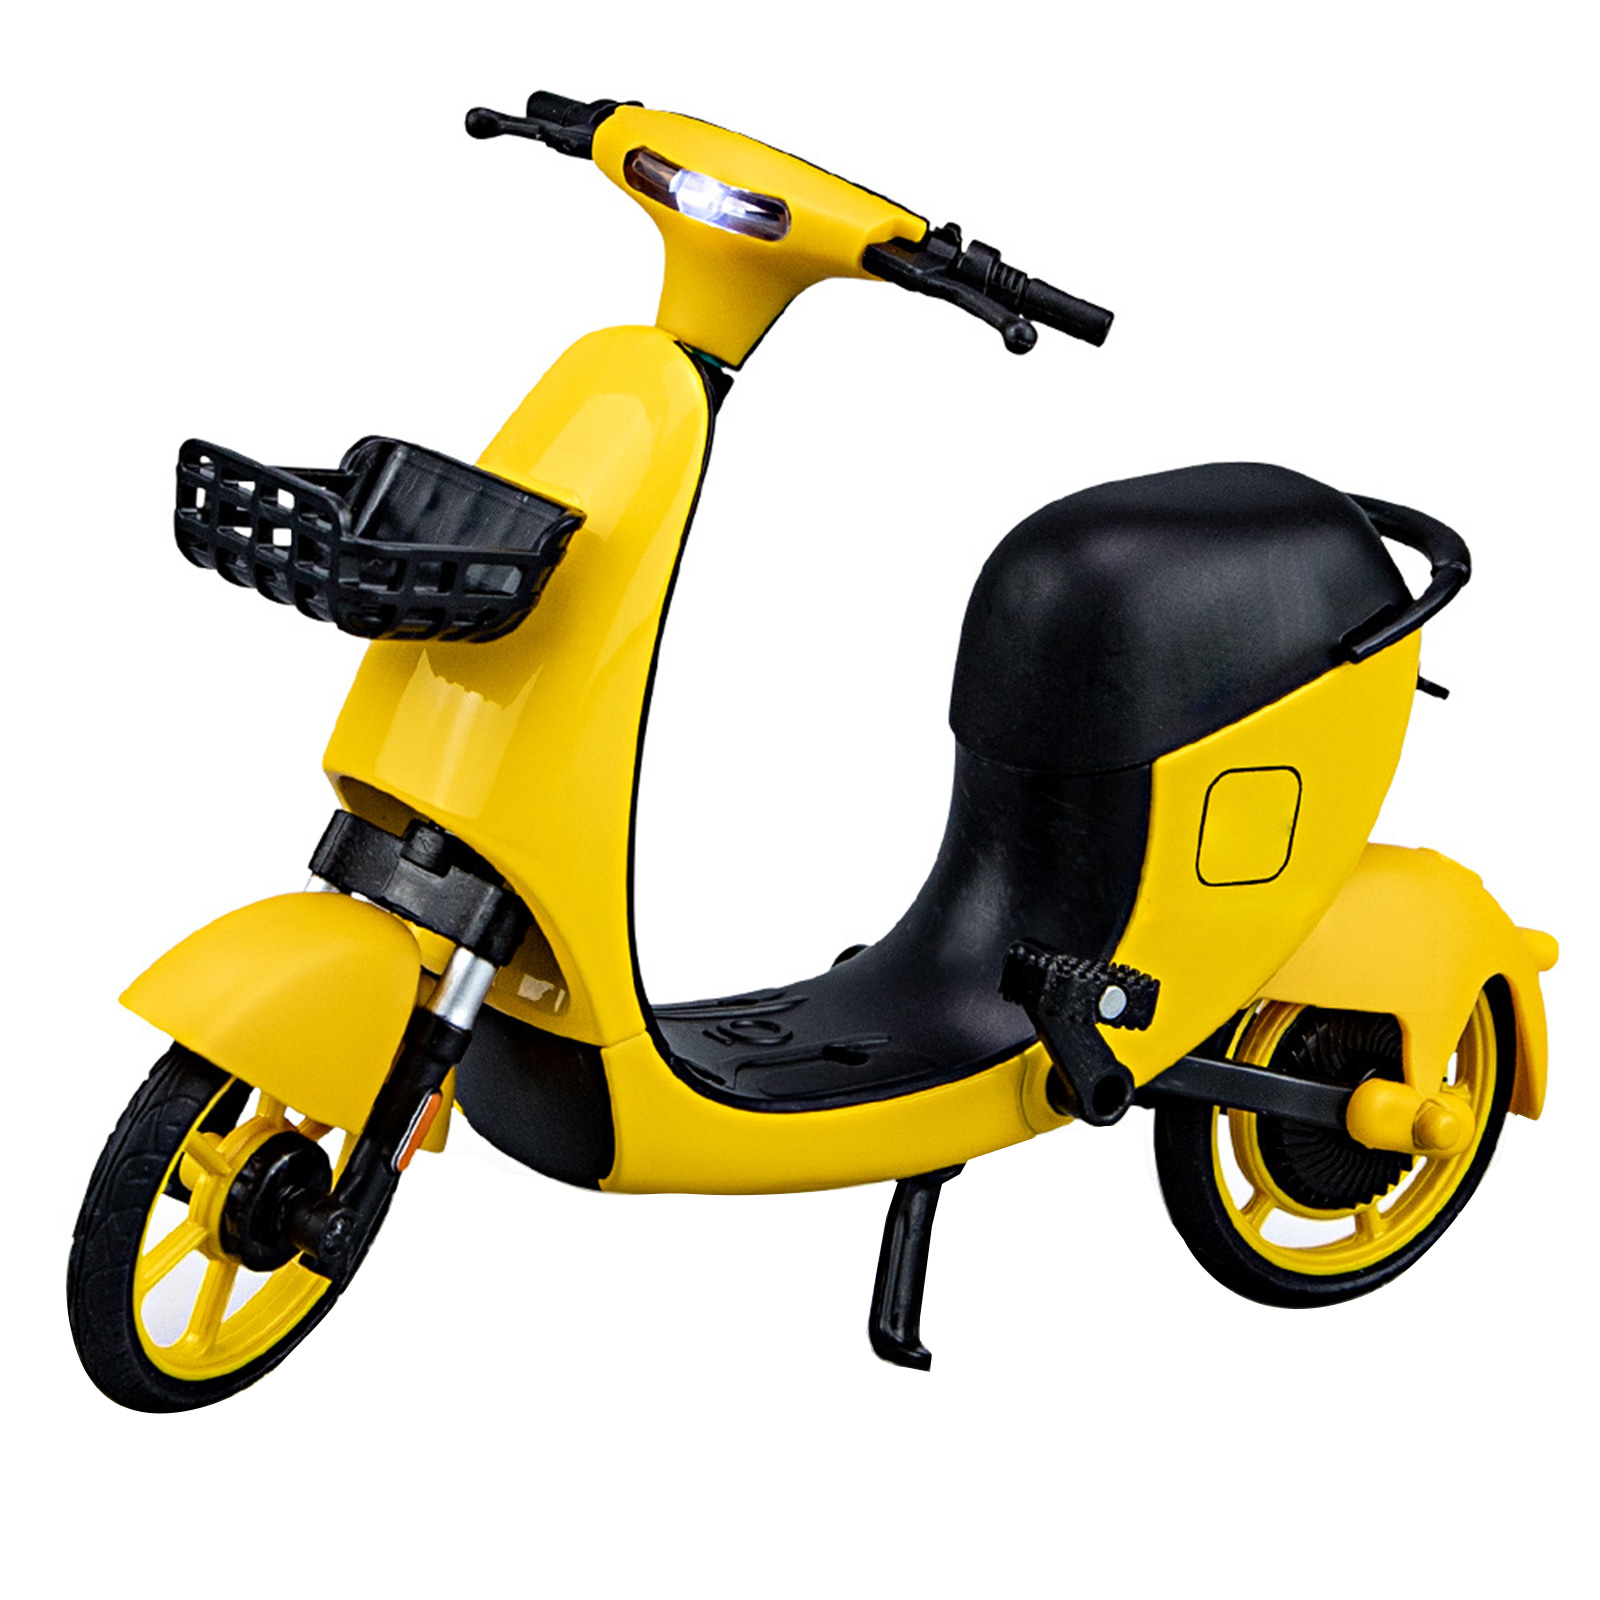 1/10 Urban Sharing Electric Bicycle With Light Simulation Alloy E-bike With Helmet Model Ornaments For Decoration